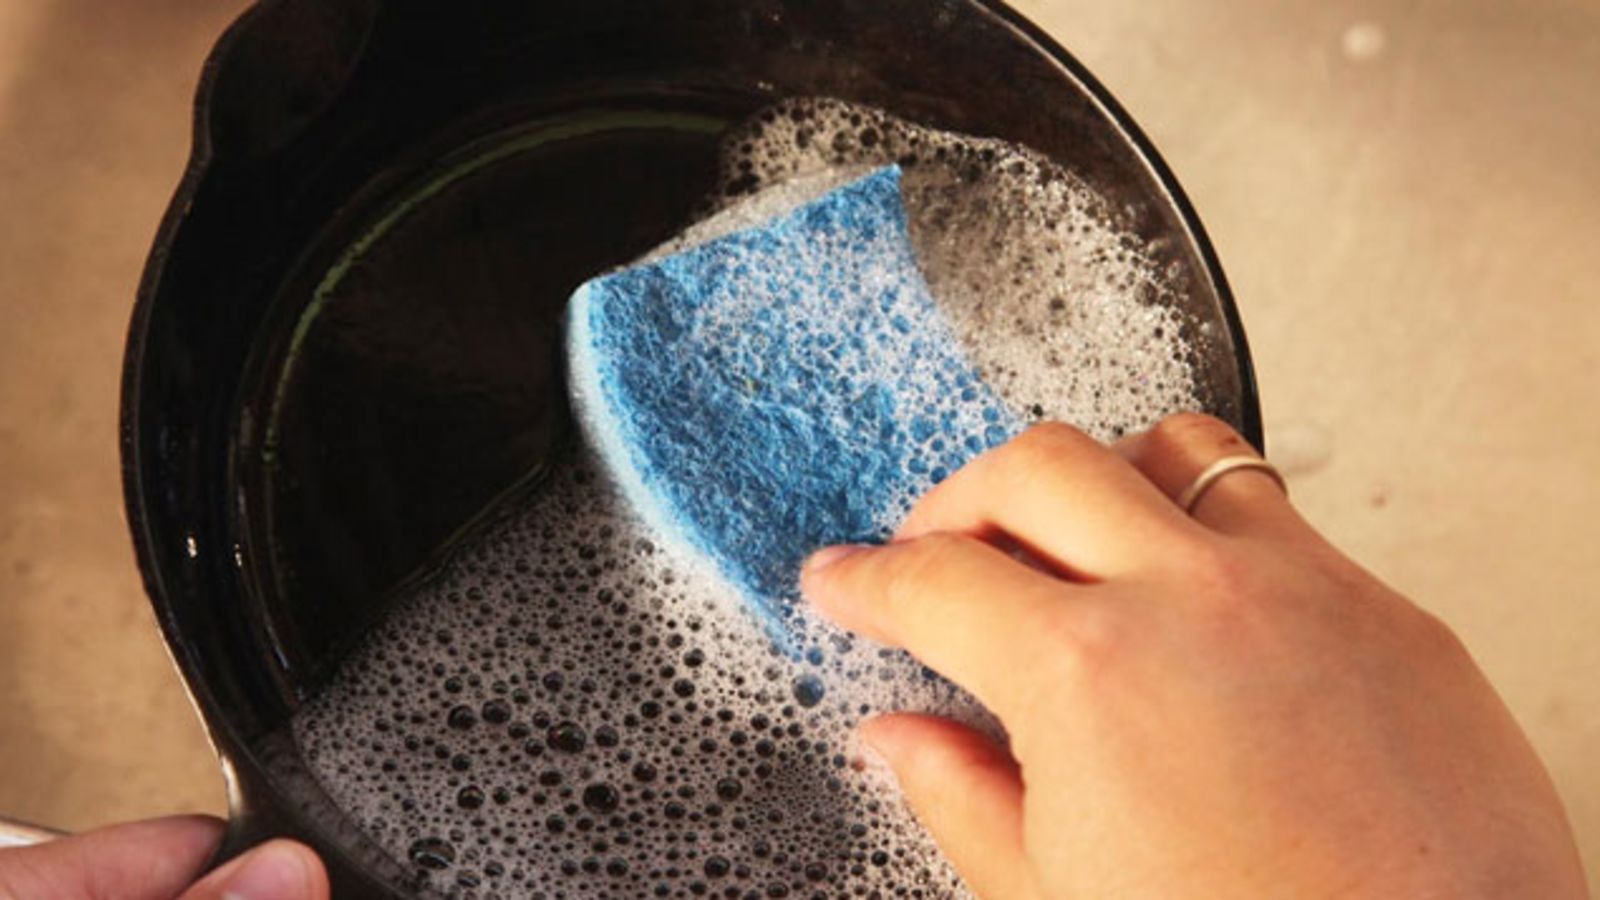 House Cleaning Mistake #1 is Never use Dish Soap on your cutting board or cast iron skillet